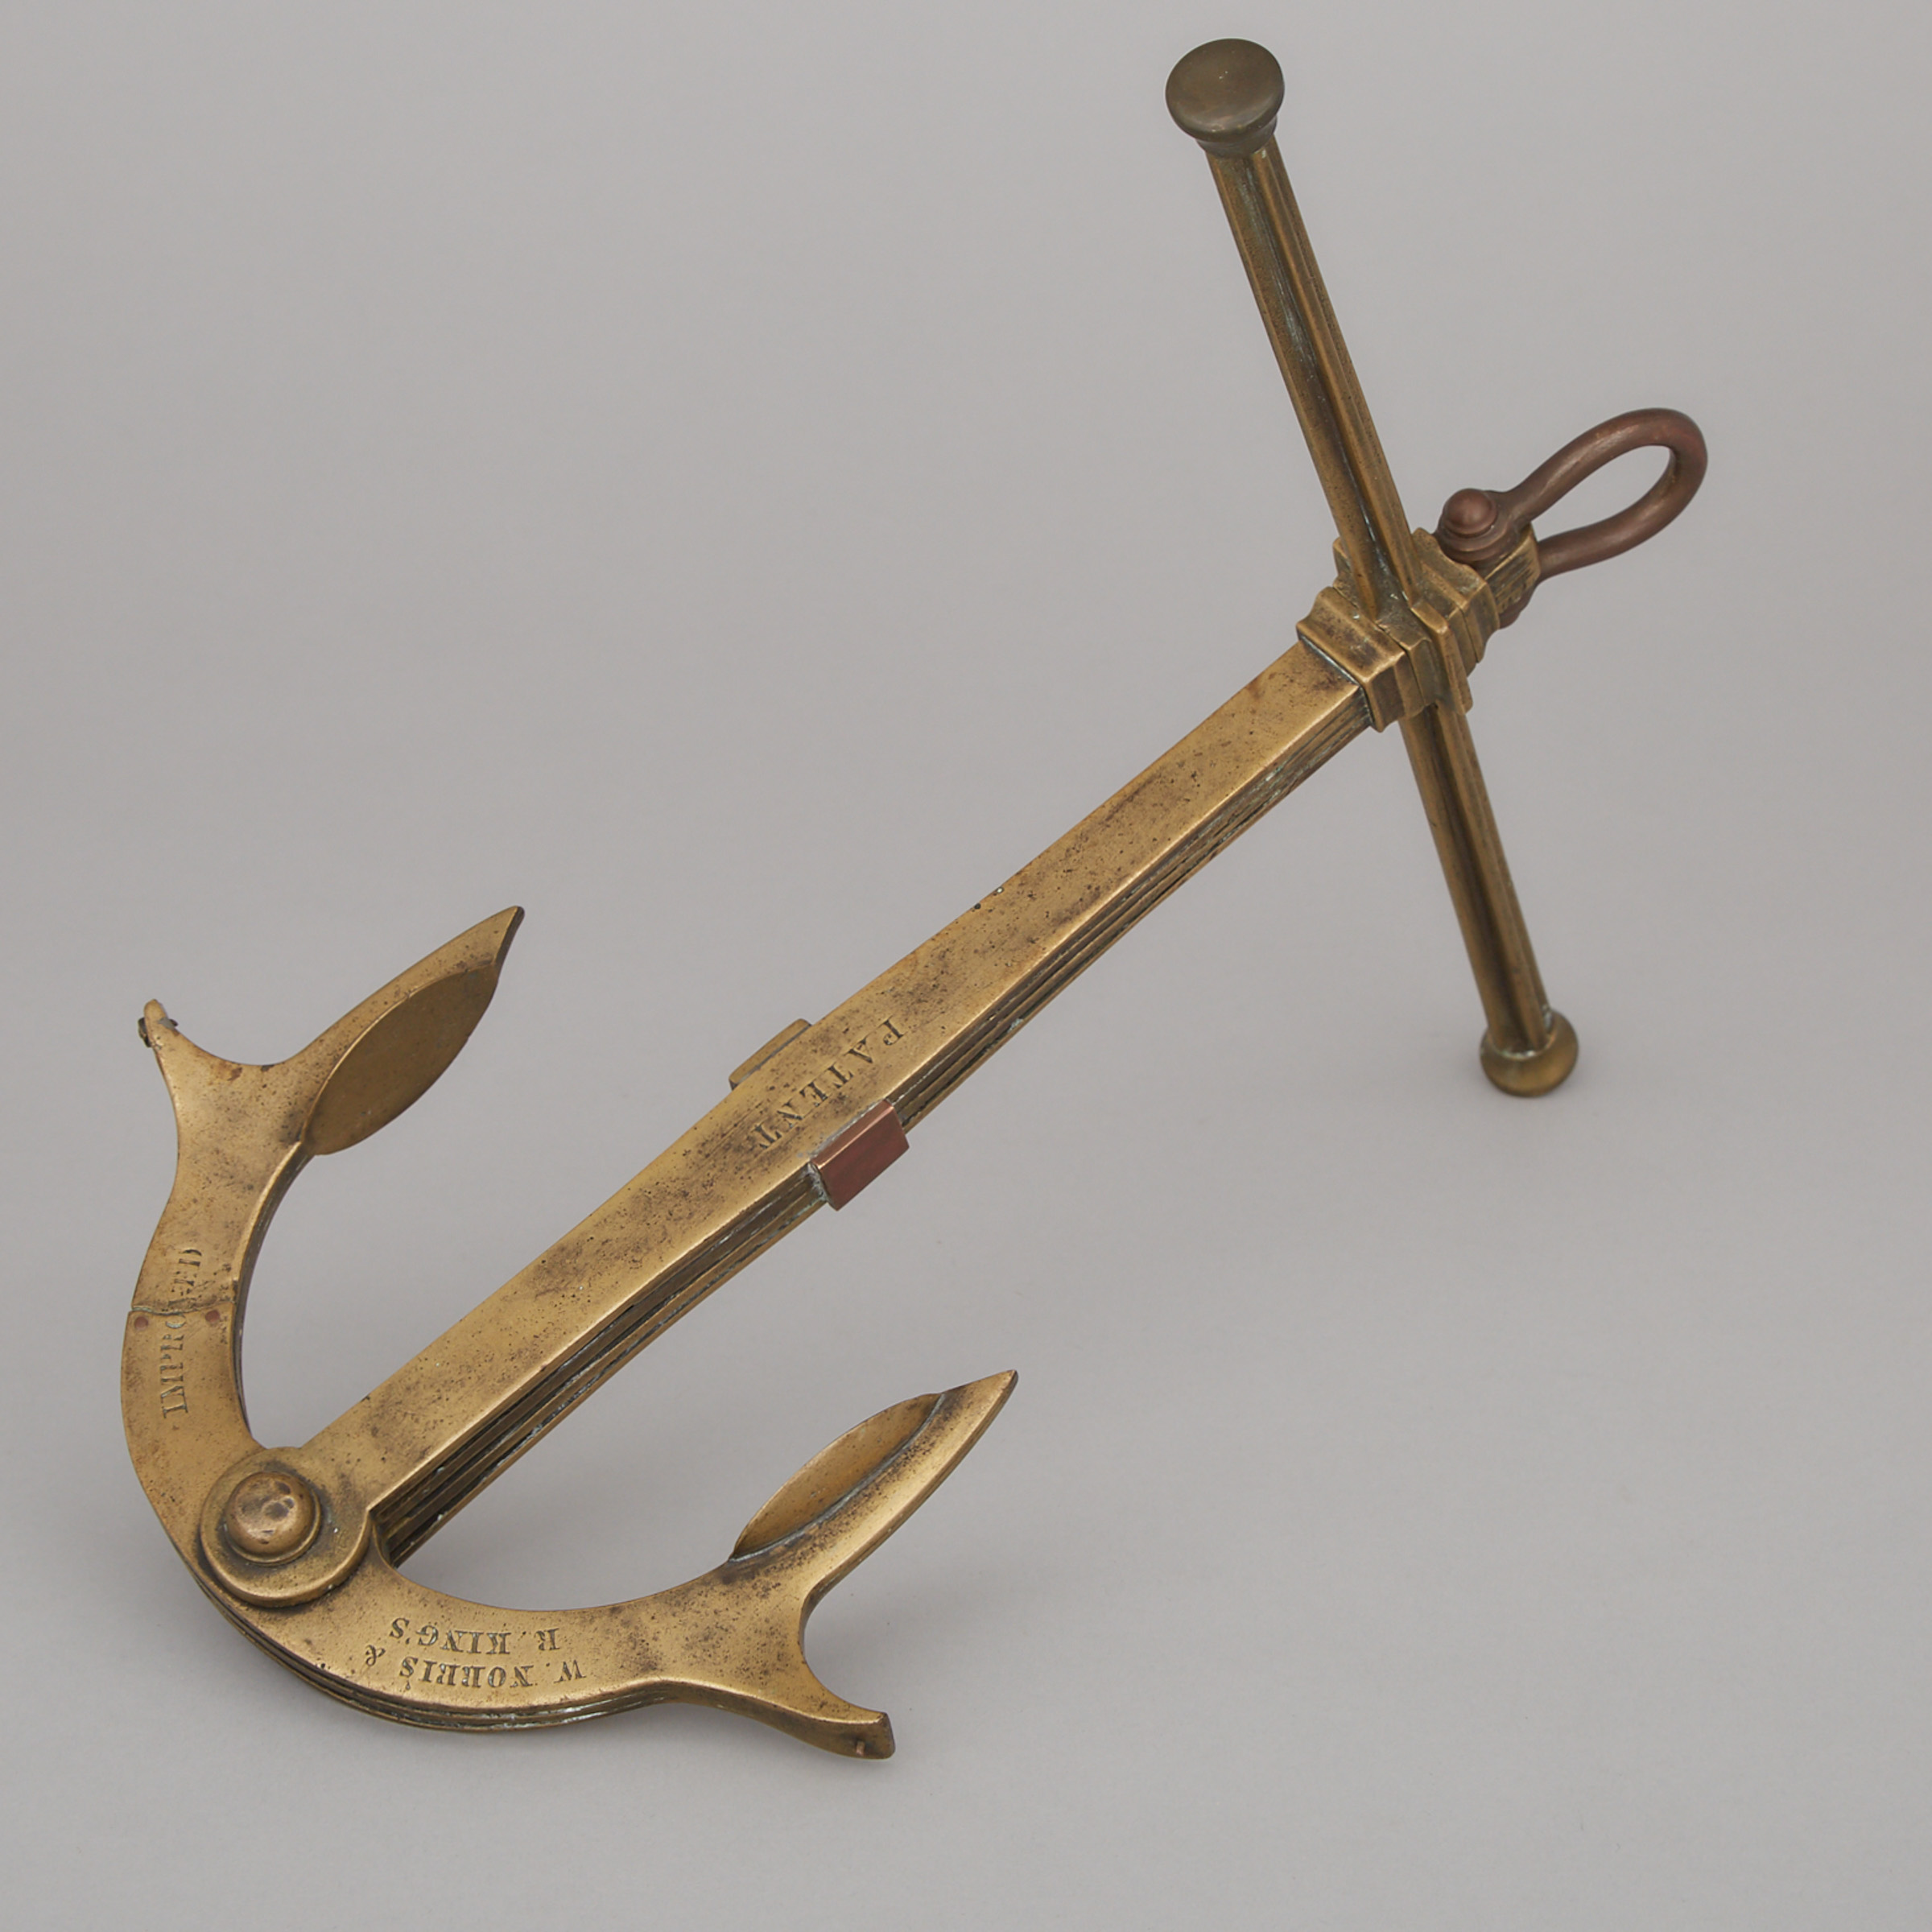 Brass Patent Model of W. Norris & R. King's Improved Anchor, mid 19th century